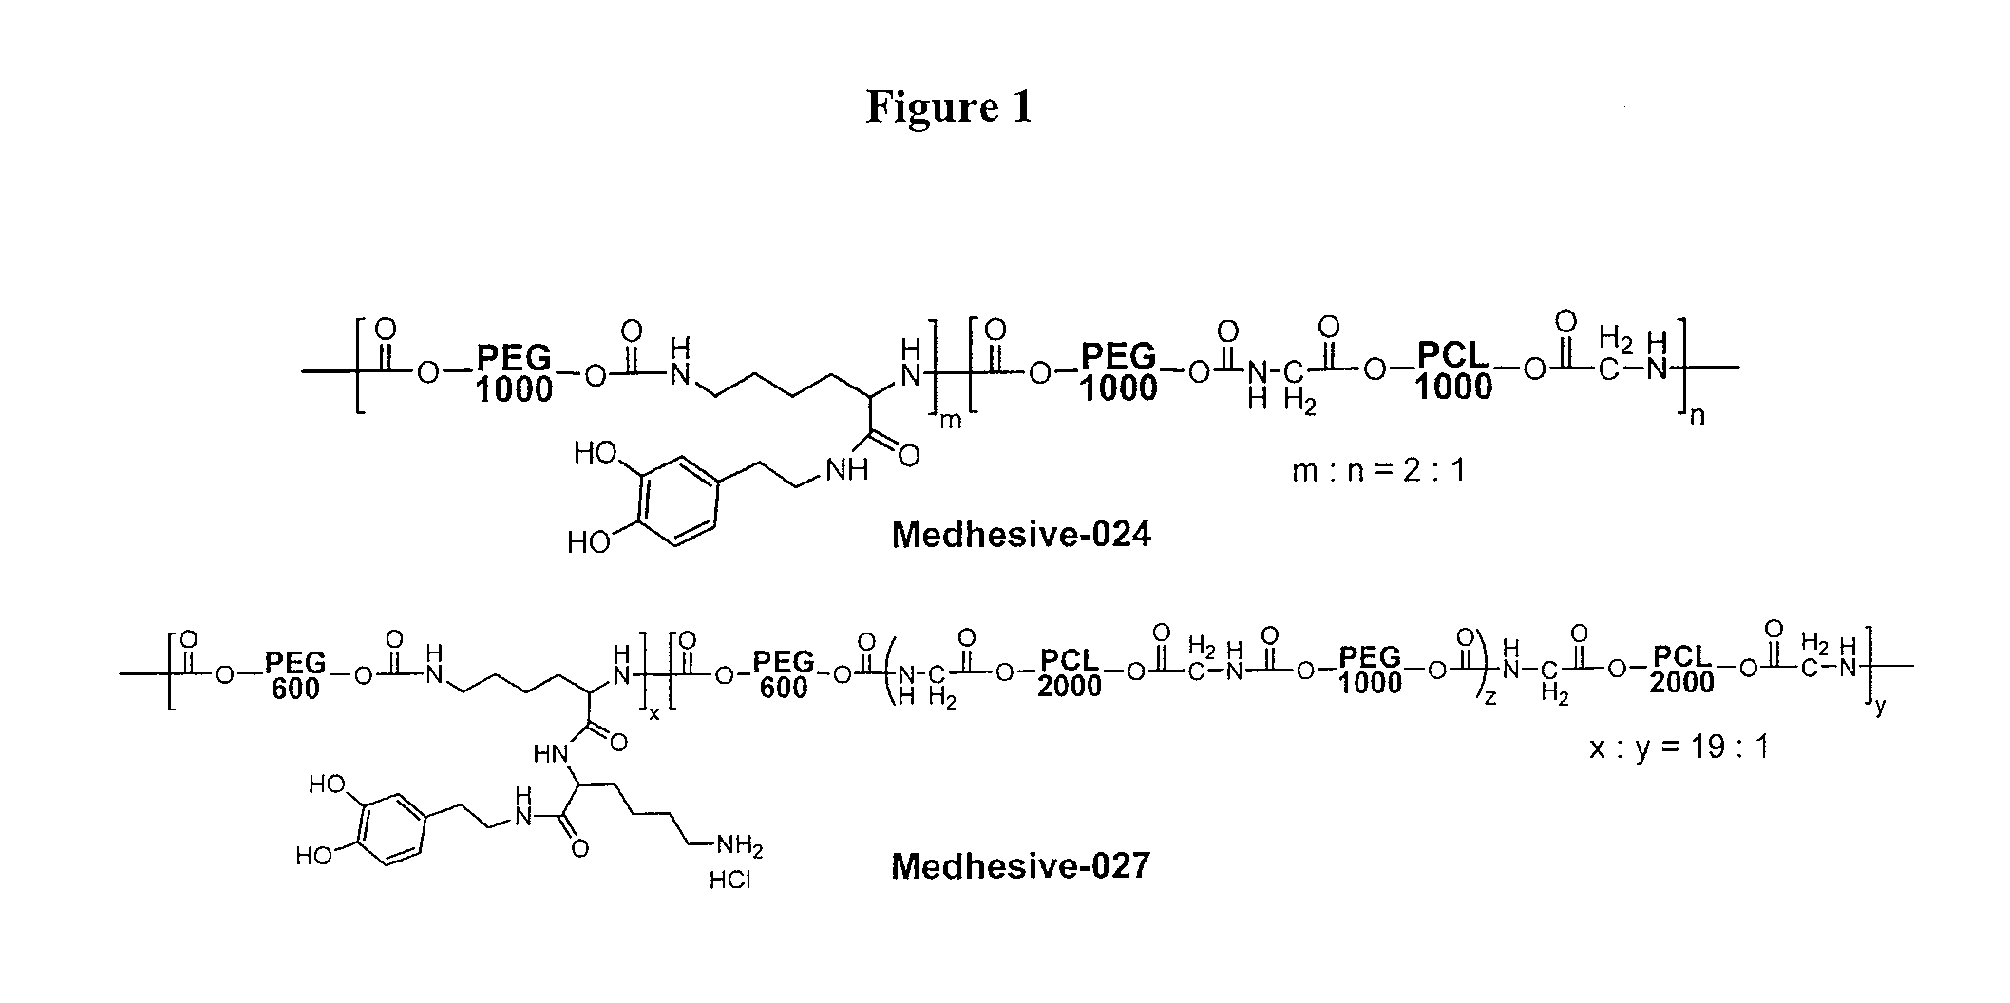 Bioadhesive constructs with polymer blends